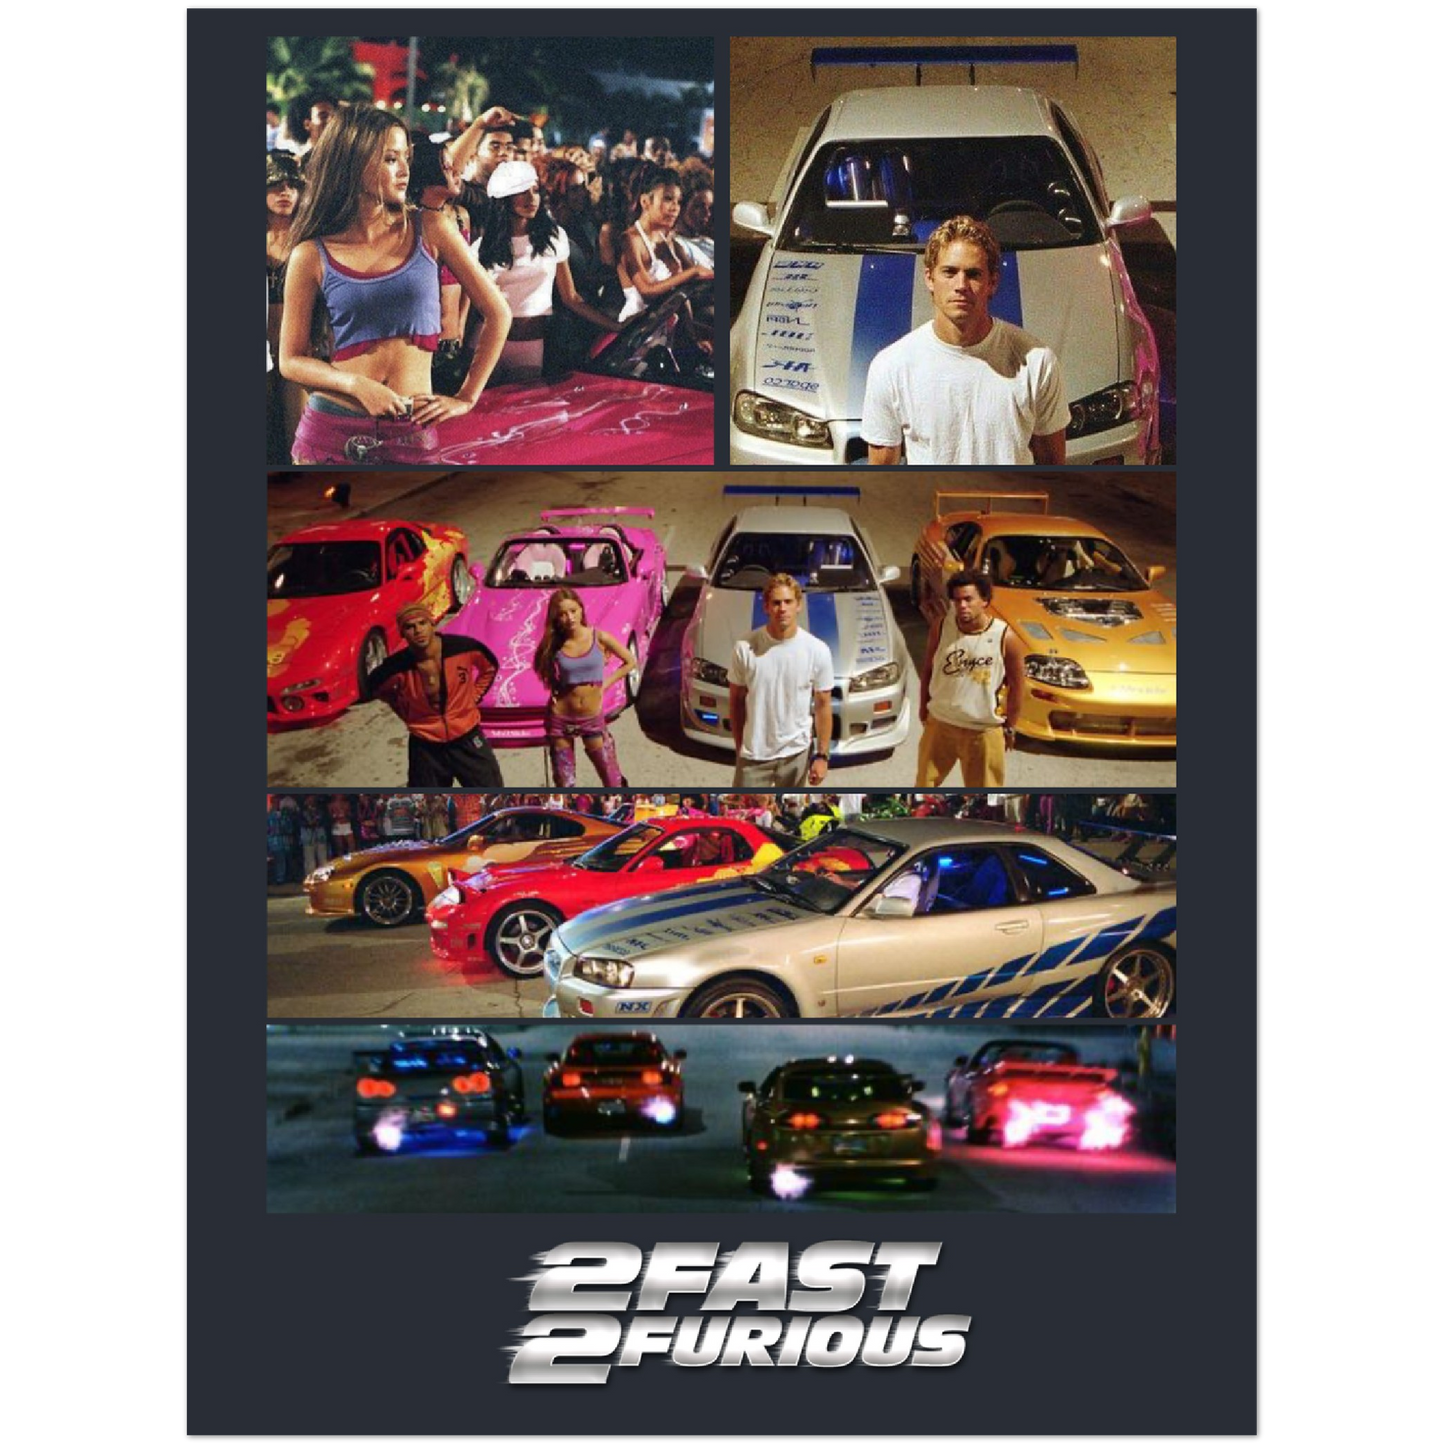 2 Fast 2 Furious - Poster